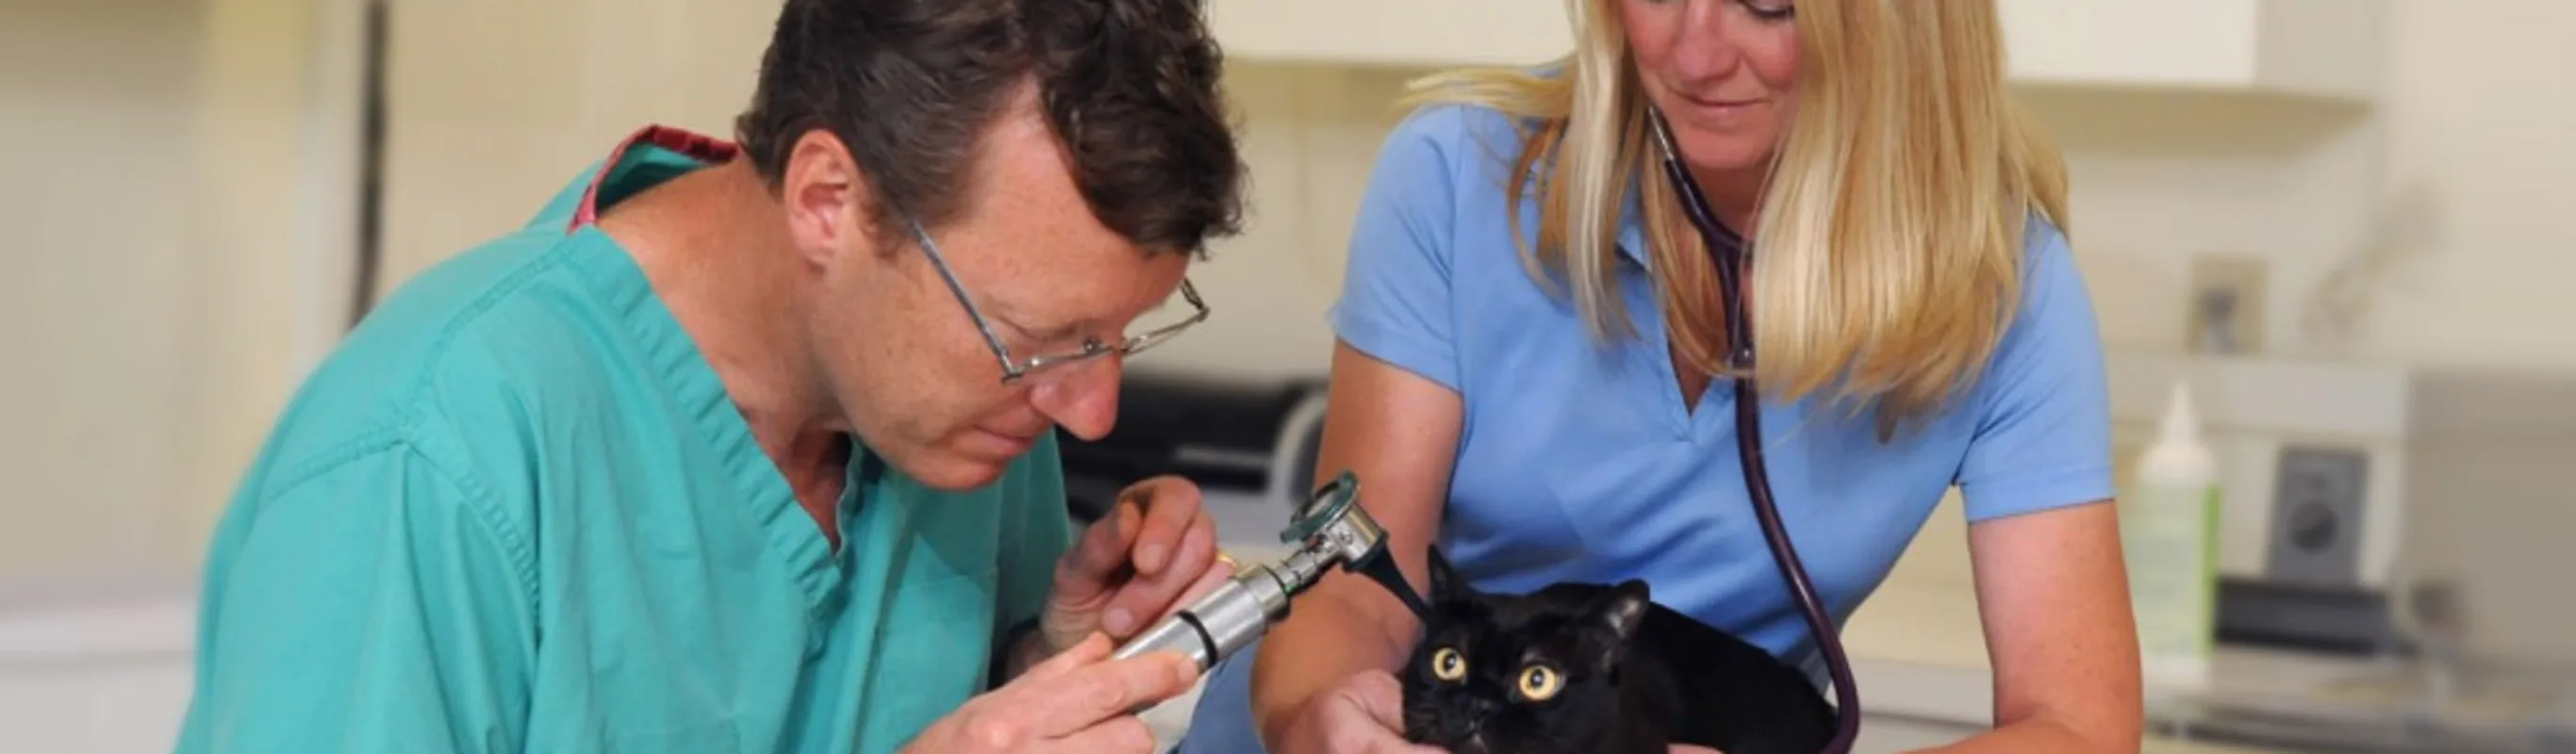 Dr. and Staff Member Examining Small Black Cat